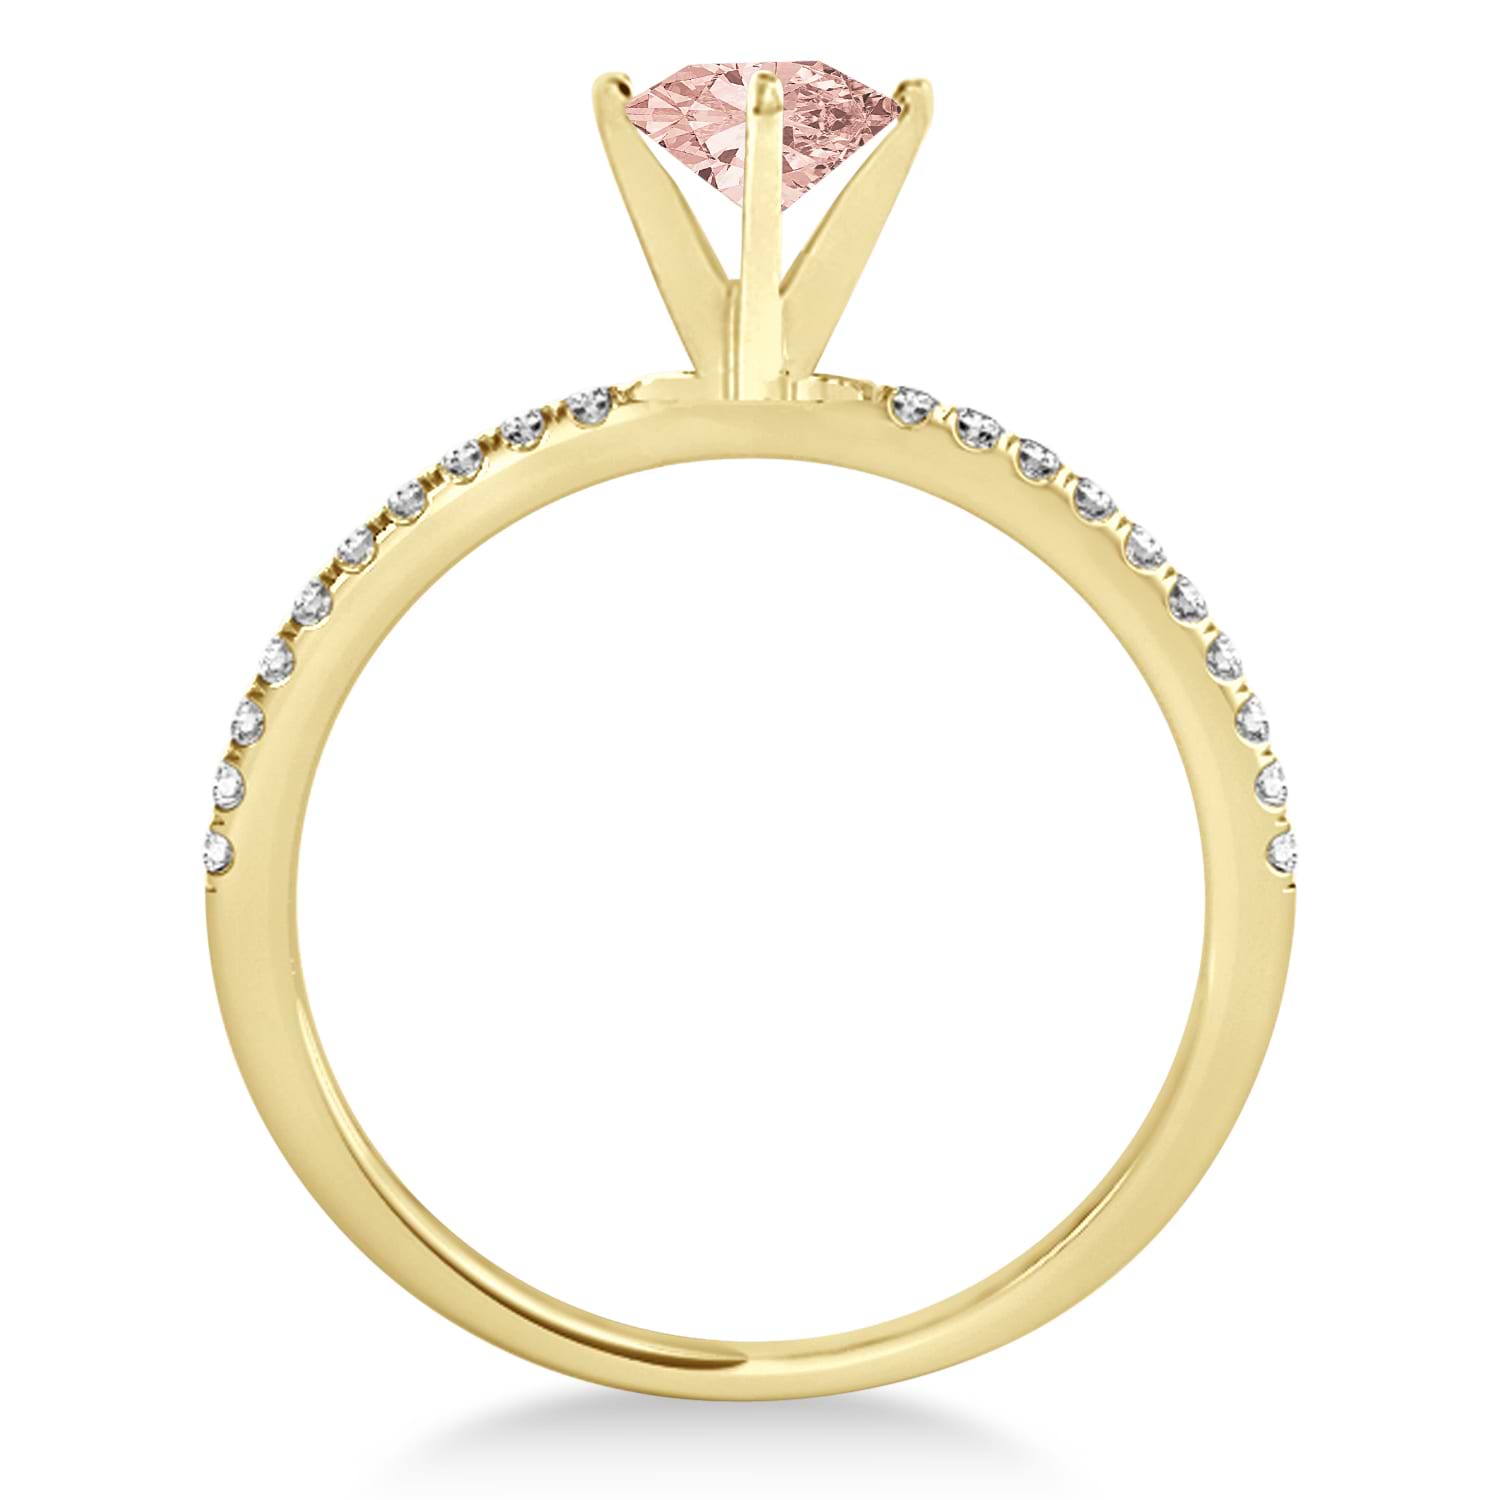 Morganite & Diamond Accented Oval Shape Engagement Ring 18k Yellow Gold (1.00ct)